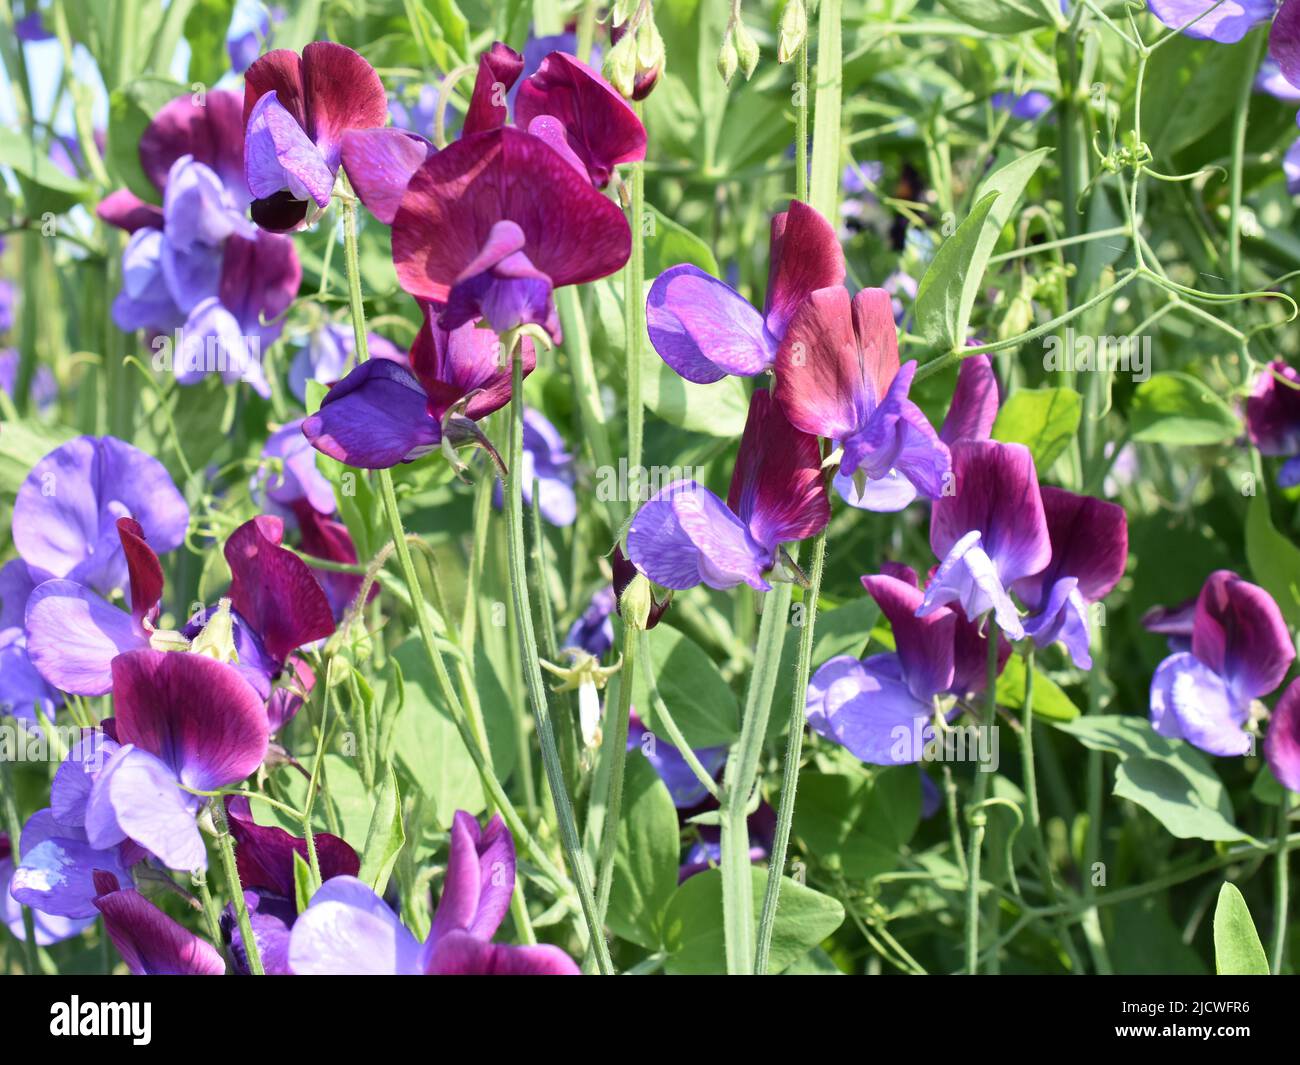 sweet pea Lathyrus odoratus flowers in different blue and purple colors Stock Photo